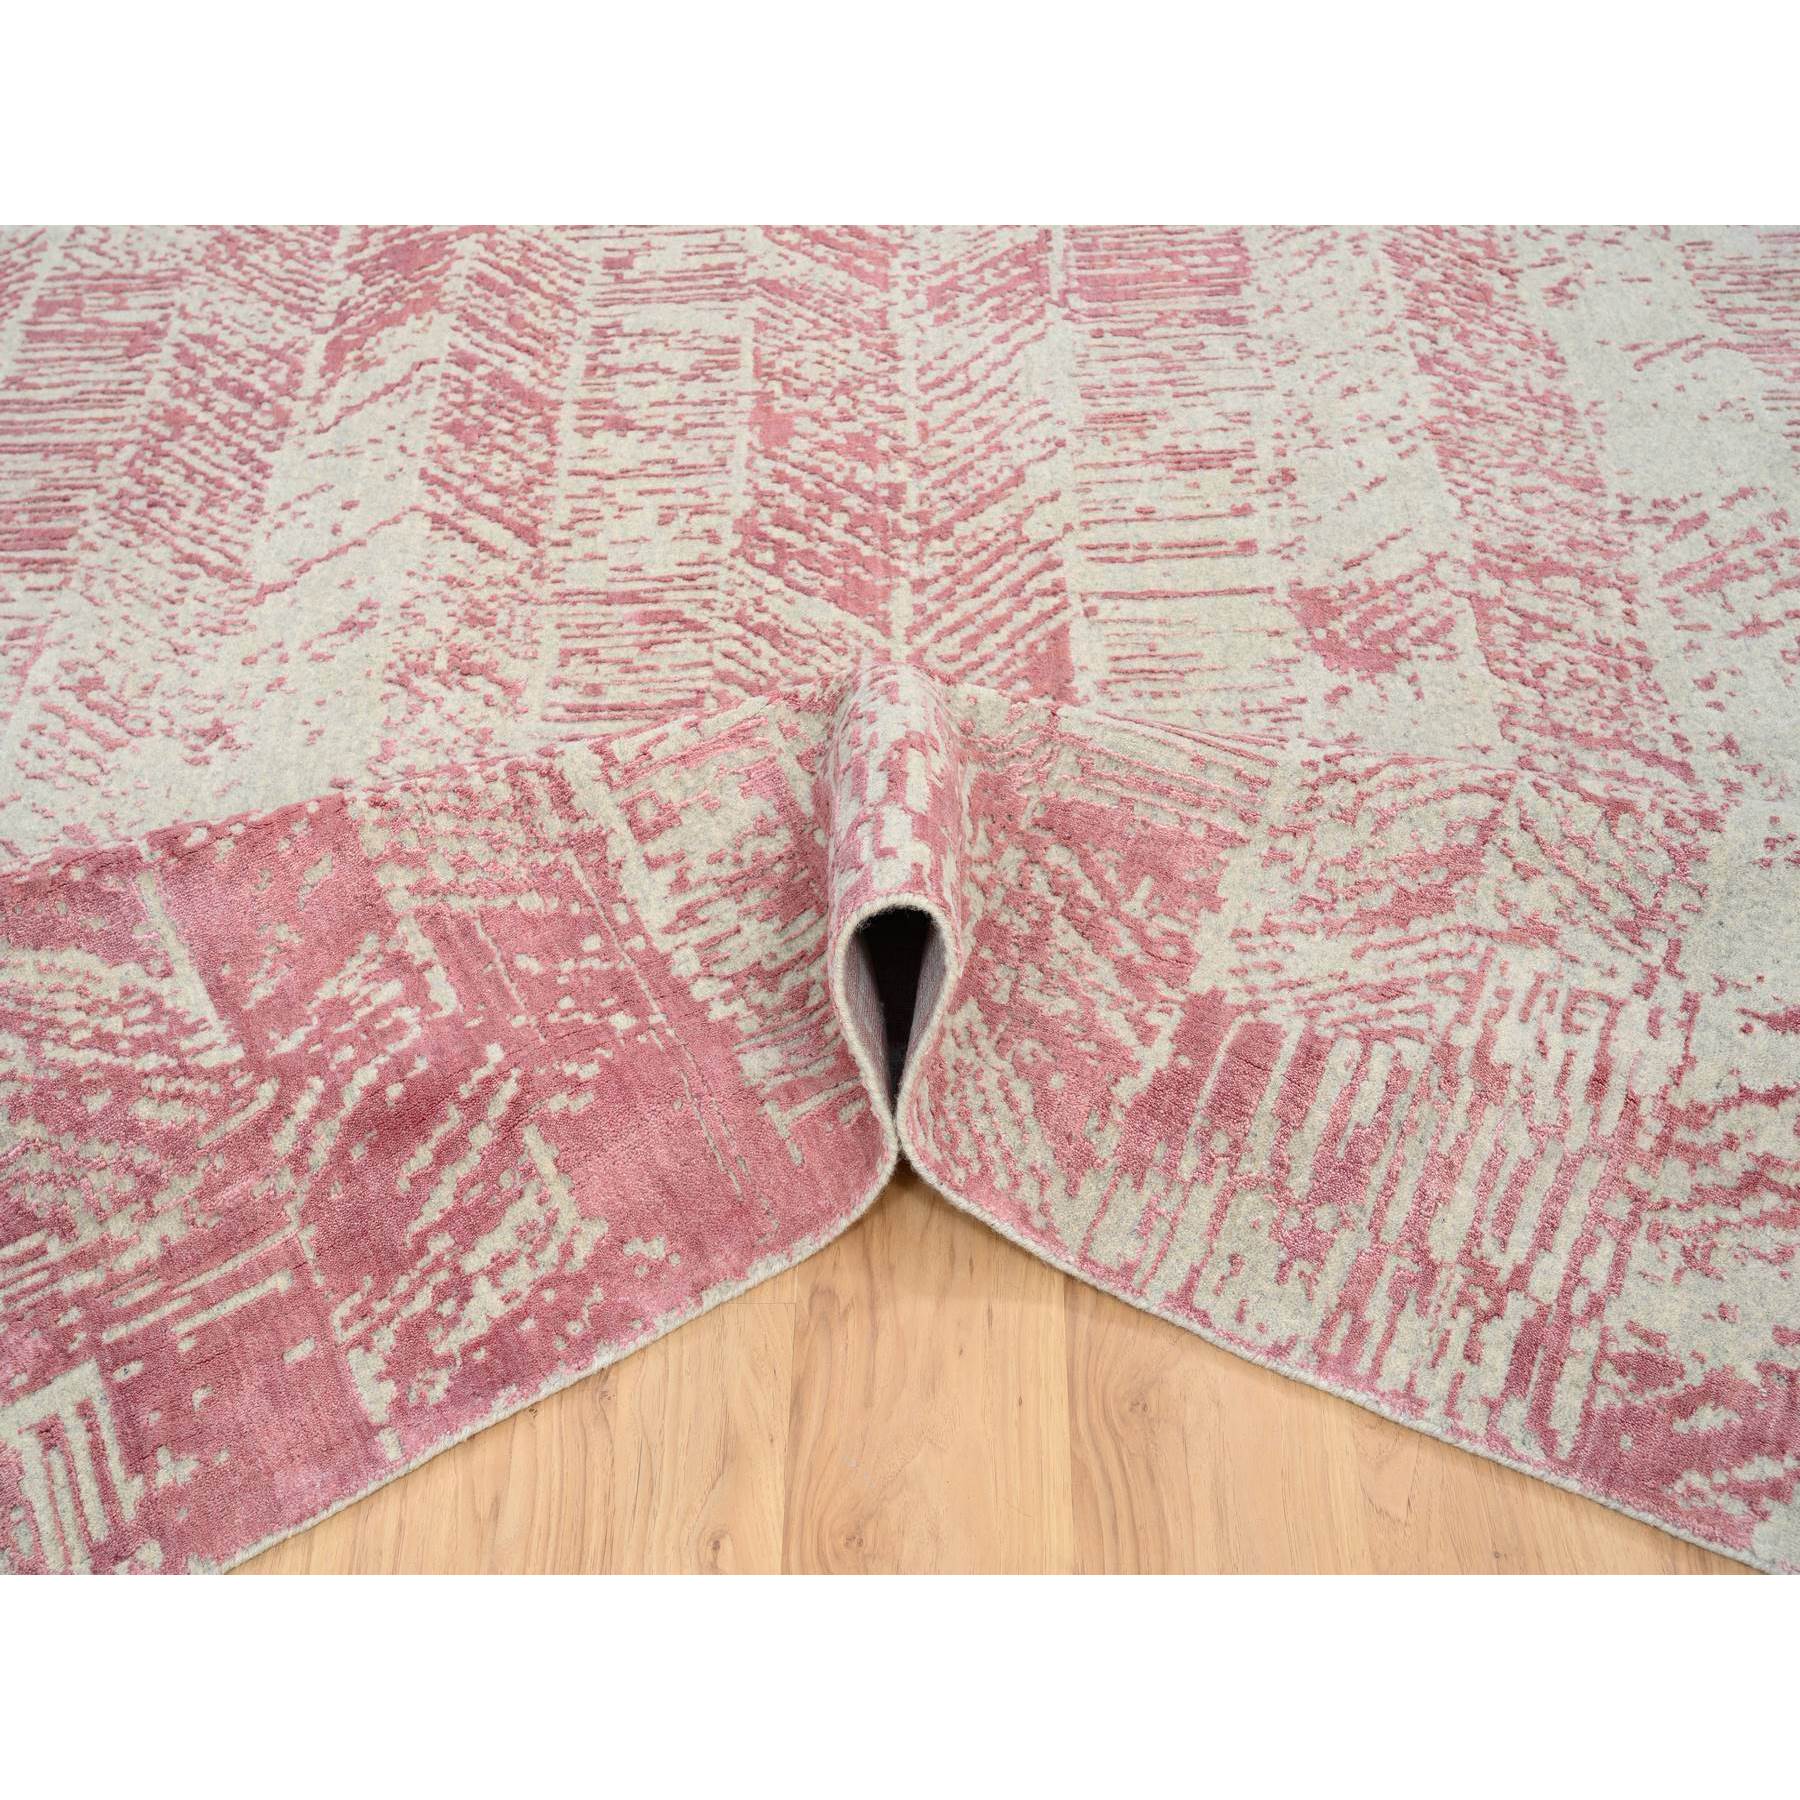 12'x12' Rose Pink, All Over Design, Wool and Art Silk Jacquard Hand Loomed Square Oriental Rug 